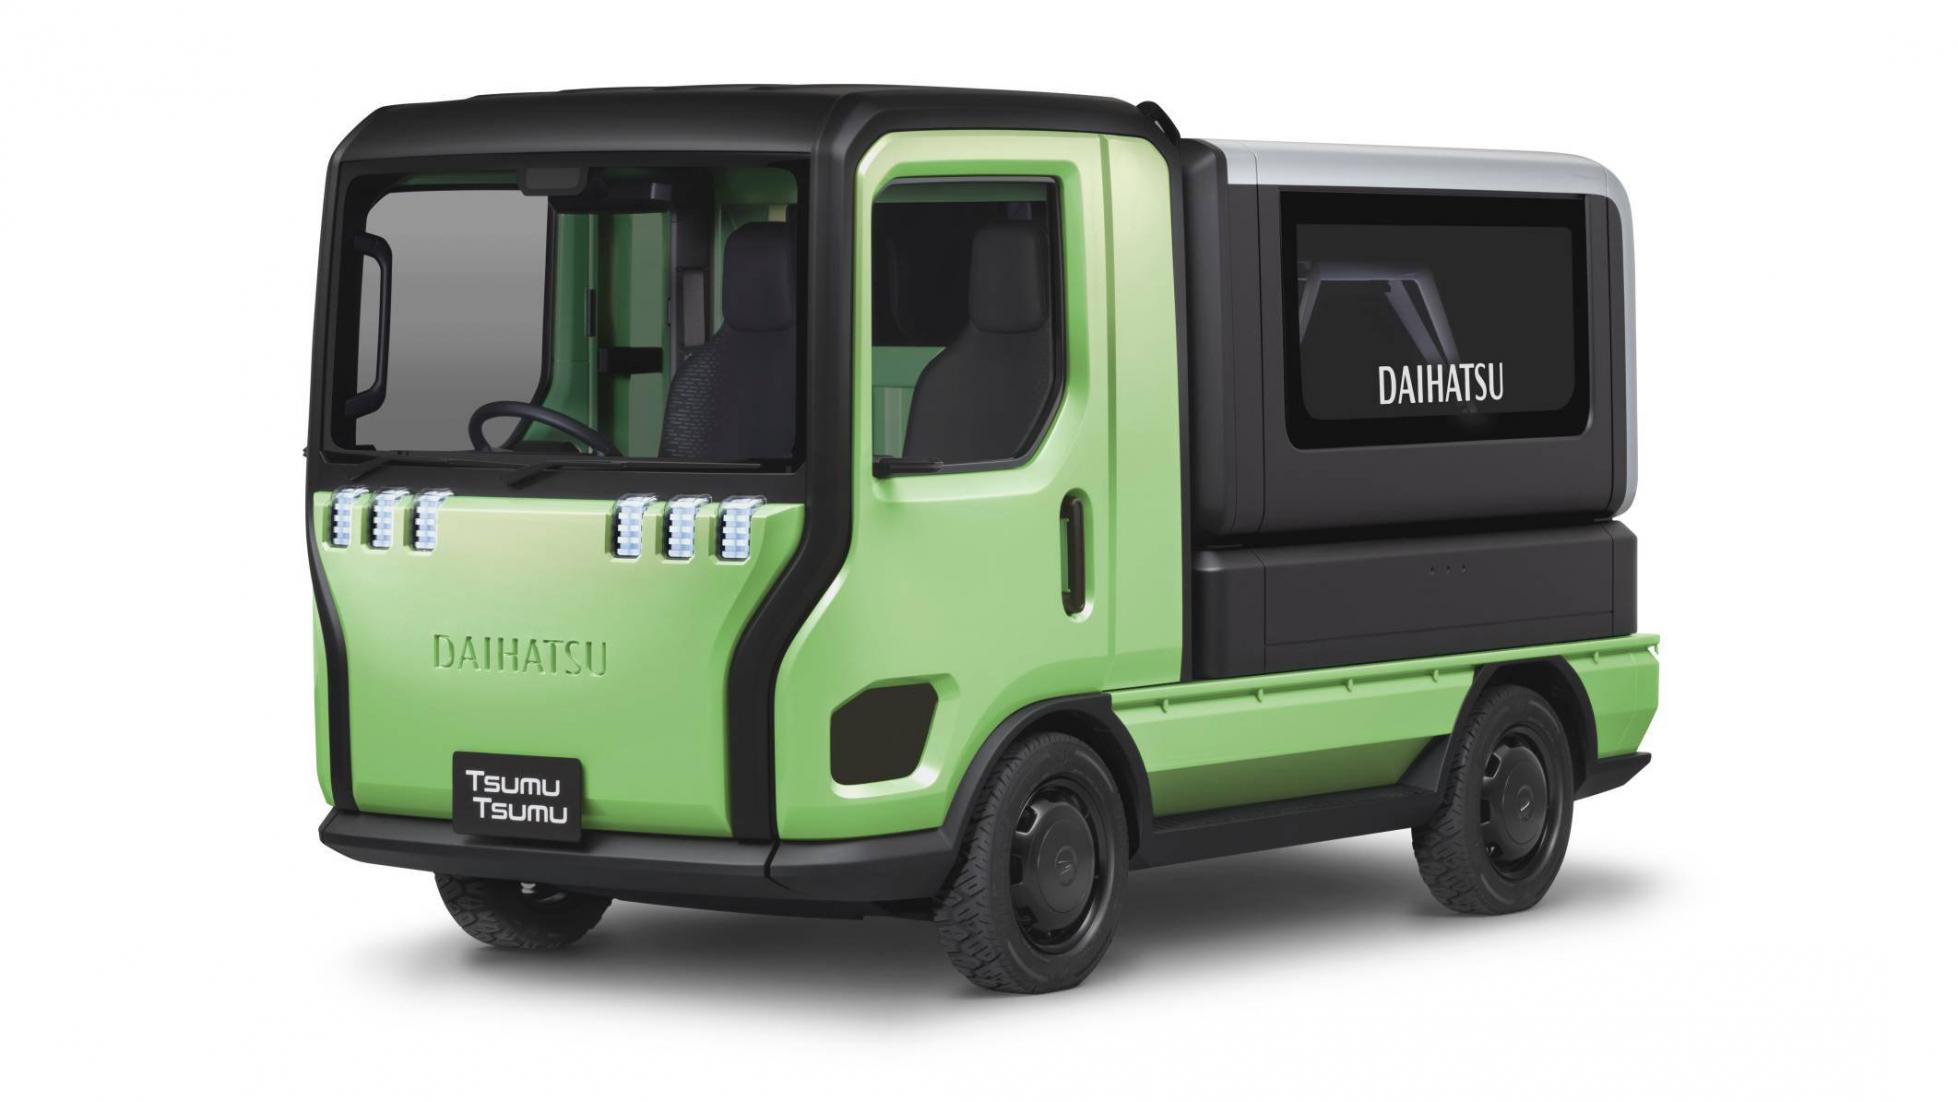 Rejoice! Daihatsu has gone fully bonkers for the Tokyo show